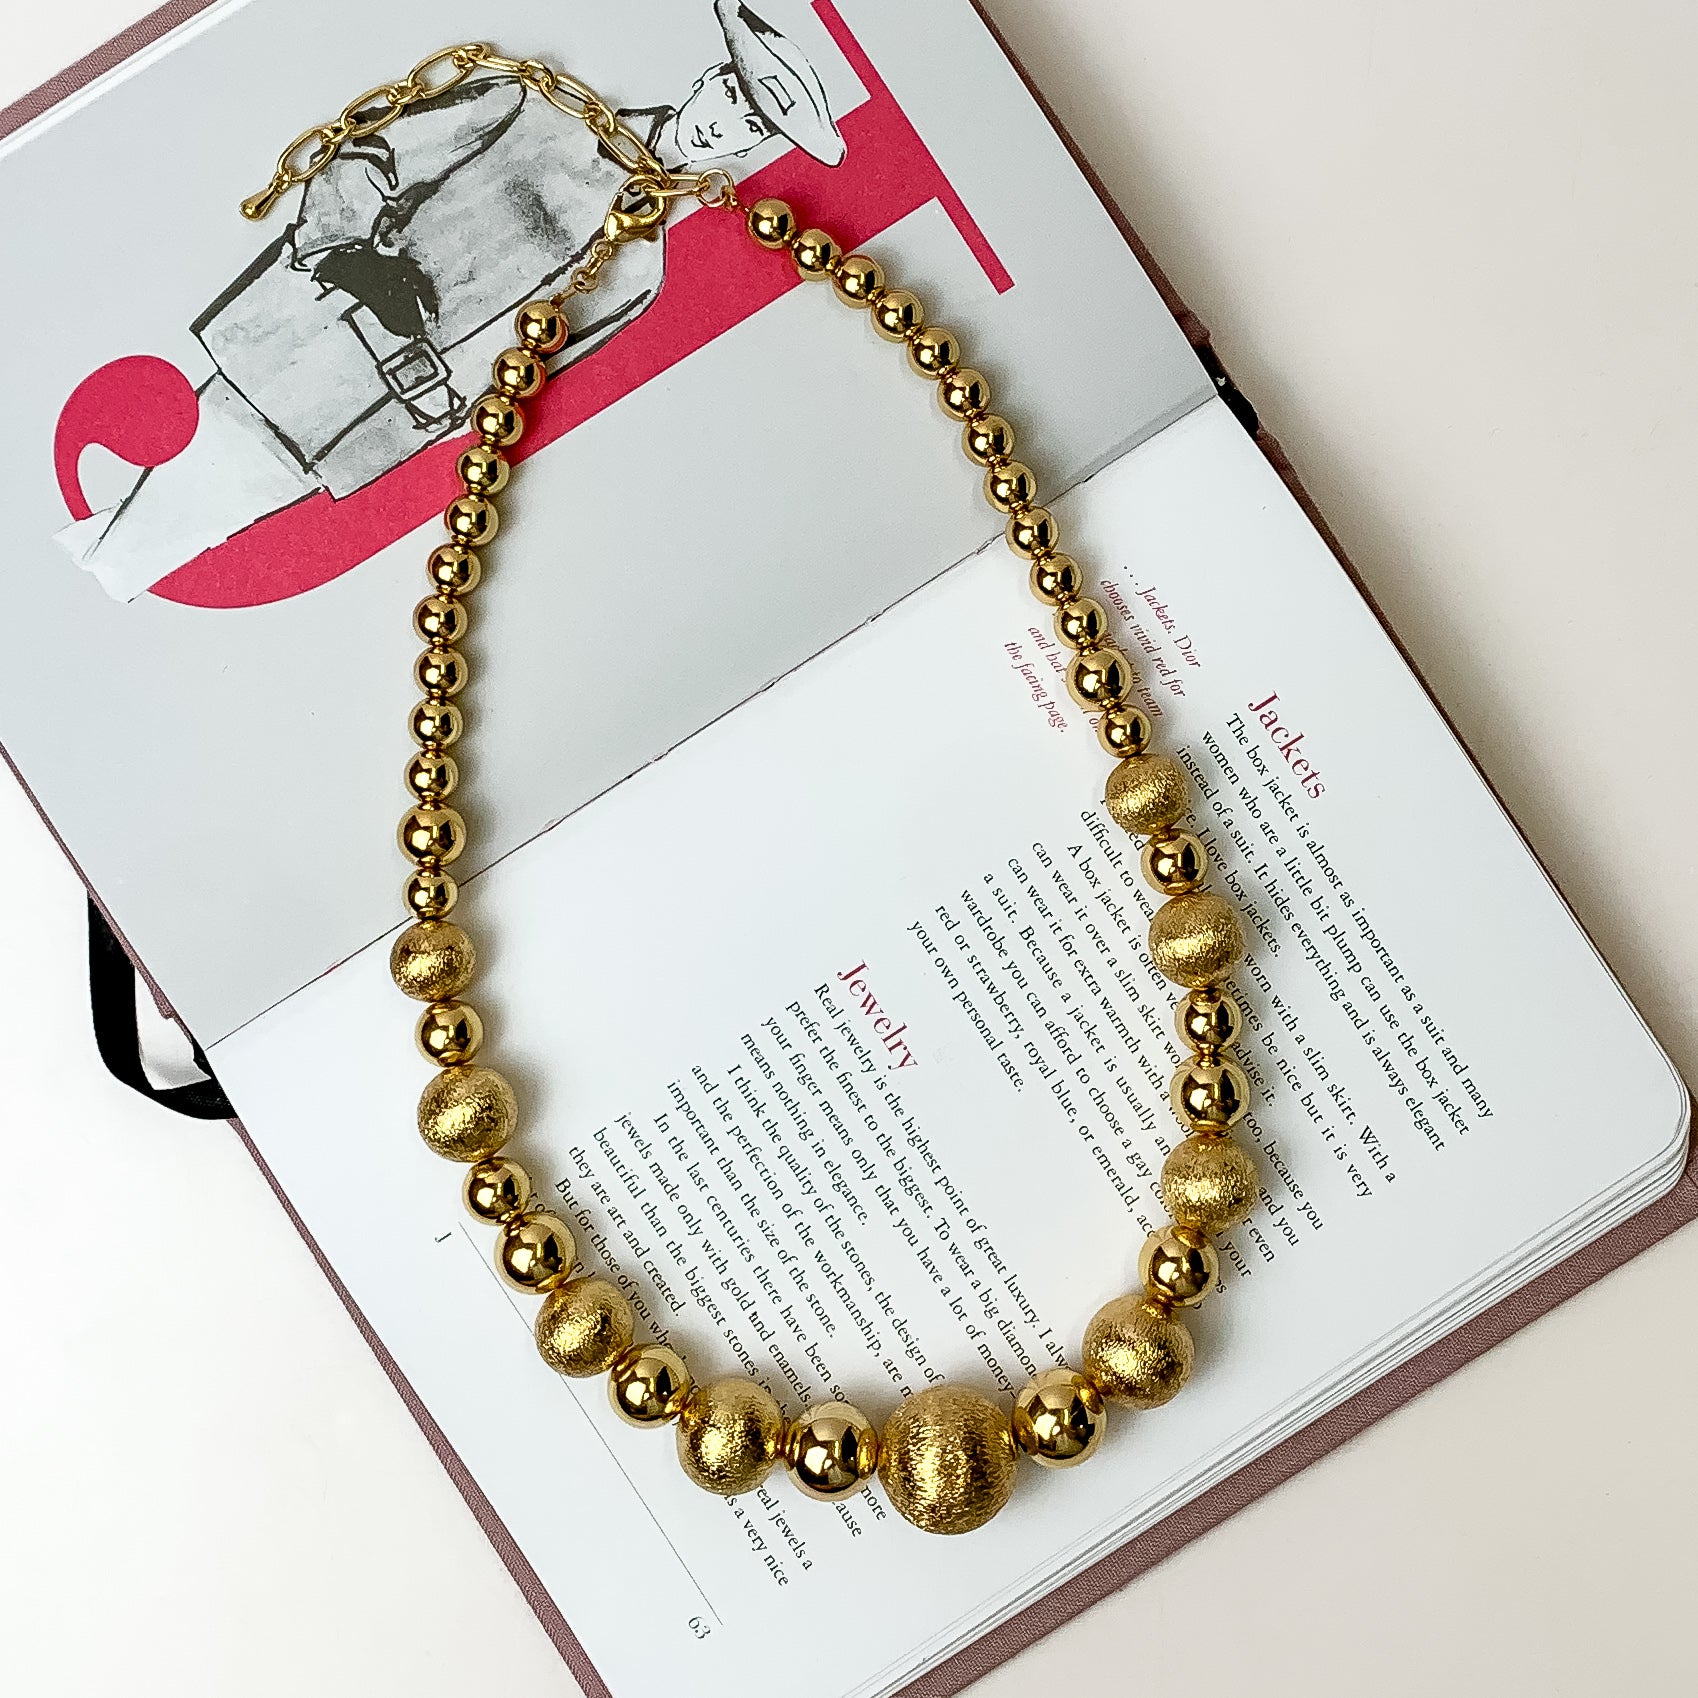 This beaded necklace with gold tone beads is placed inside the pages of a book with a white background.